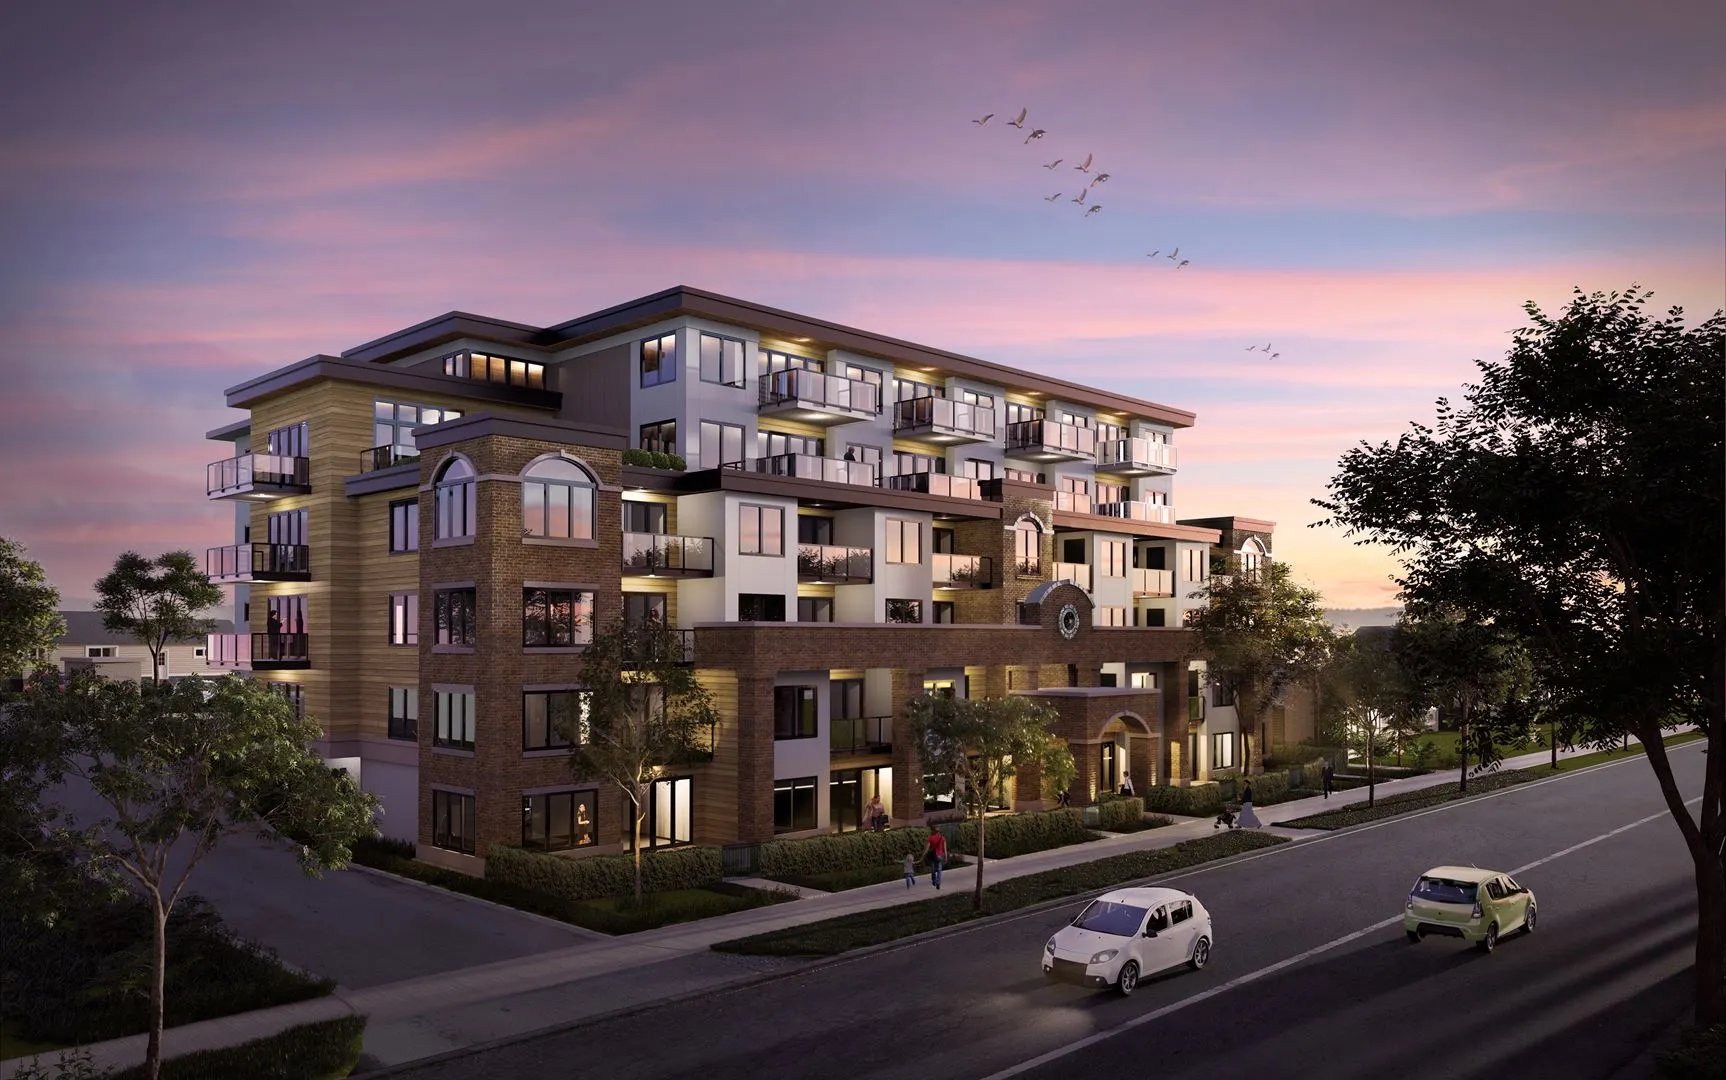 The Station by Parkshore Projects is a 69-unit Central Nanaimo condominium building.